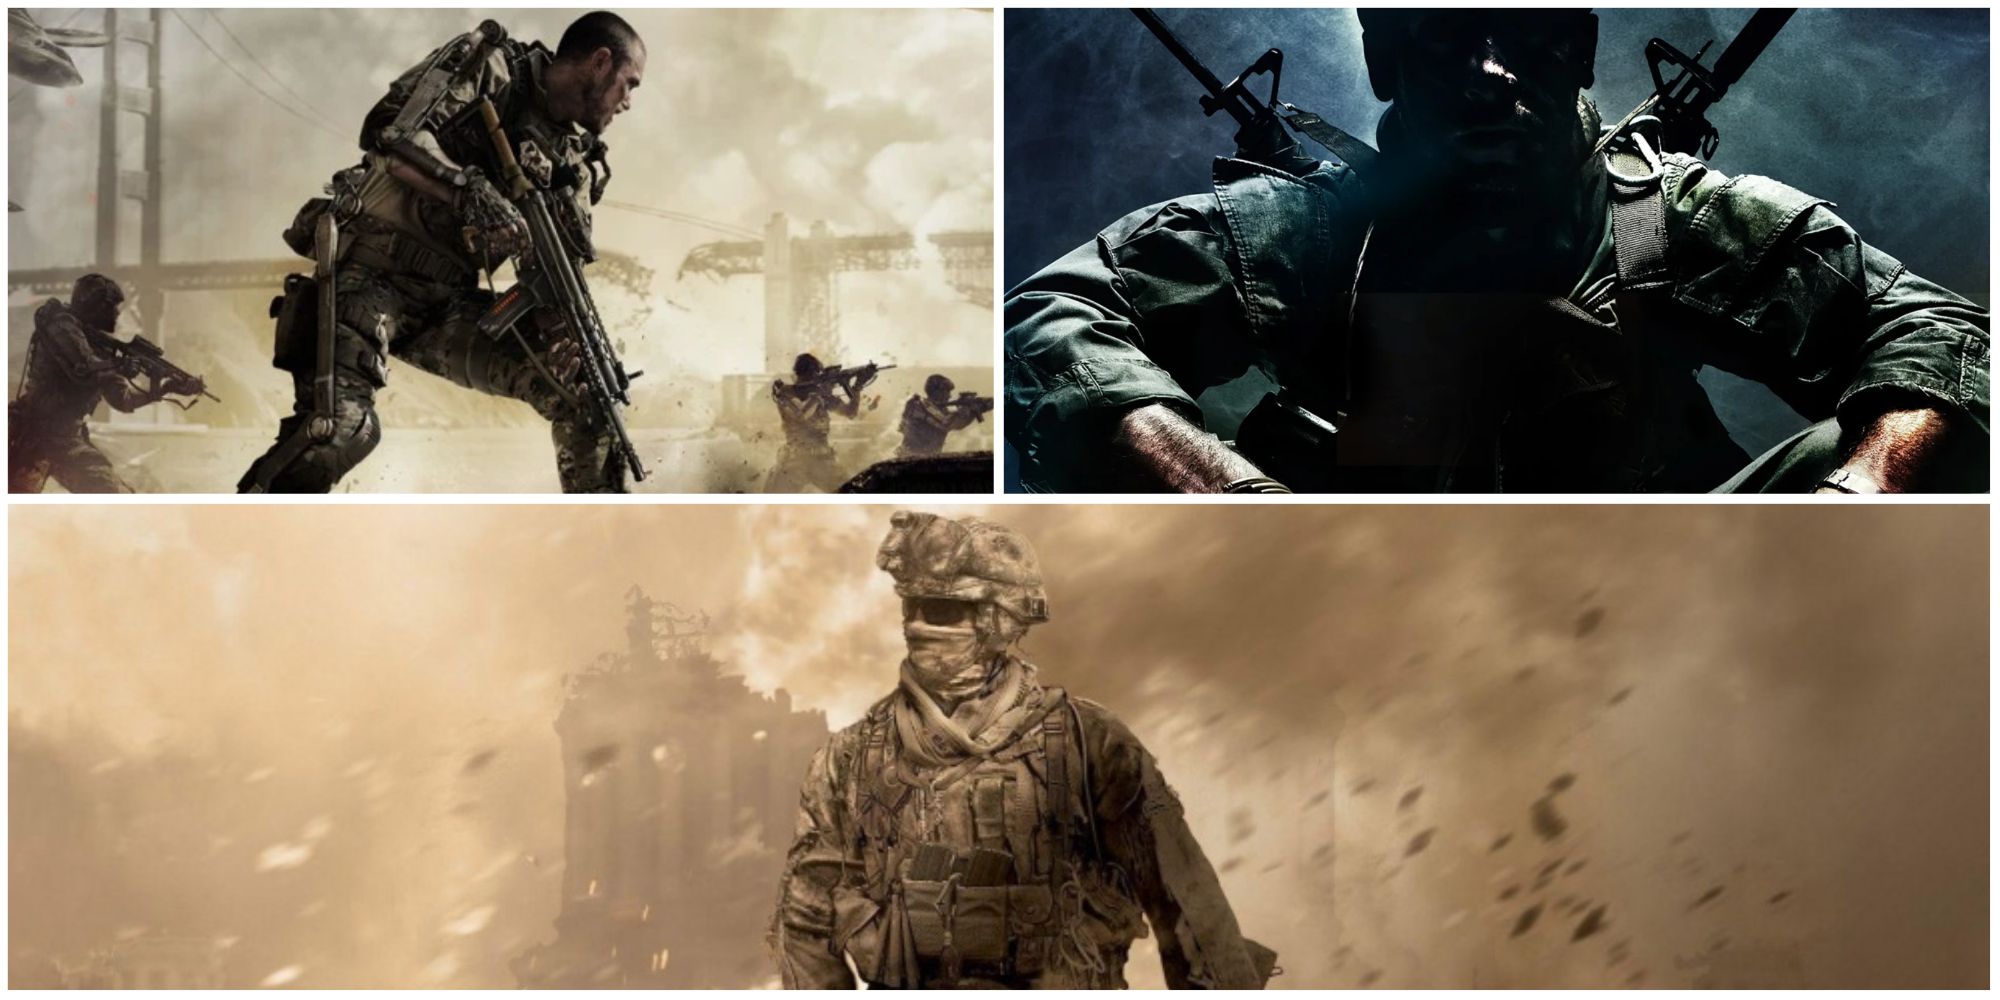 Metacritic - Call of Duty: Vanguard reviews are coming in